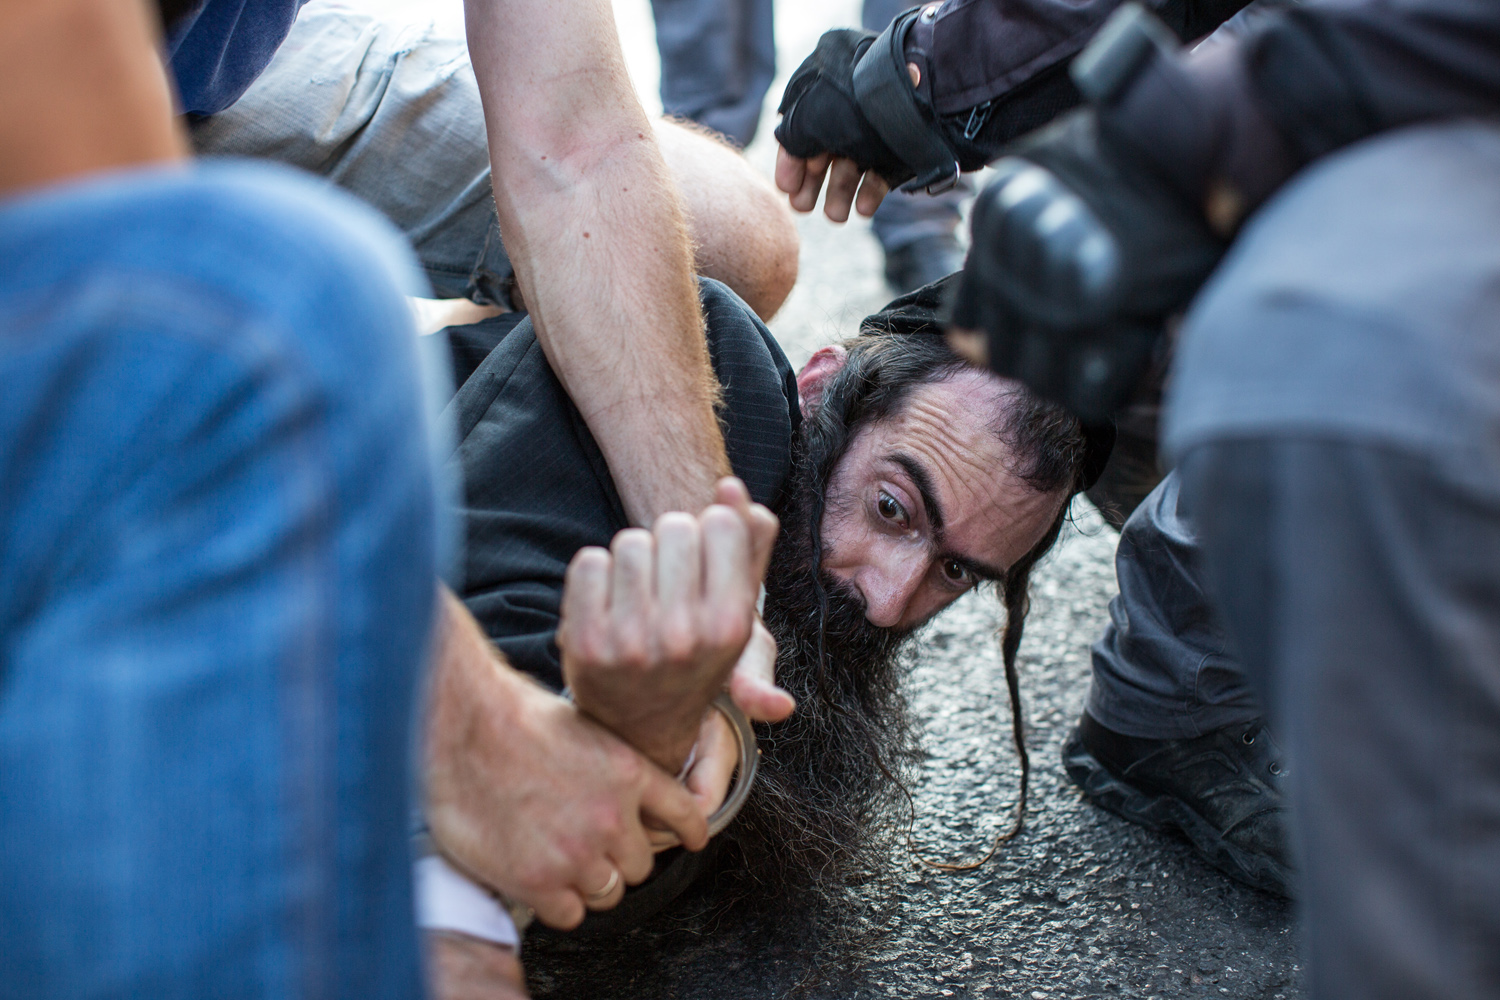 Knife-wielding assailant is wrestled to the ground at Jerusalem's Gay Pride Parade (photo: Emil Salman/ Haaretz)